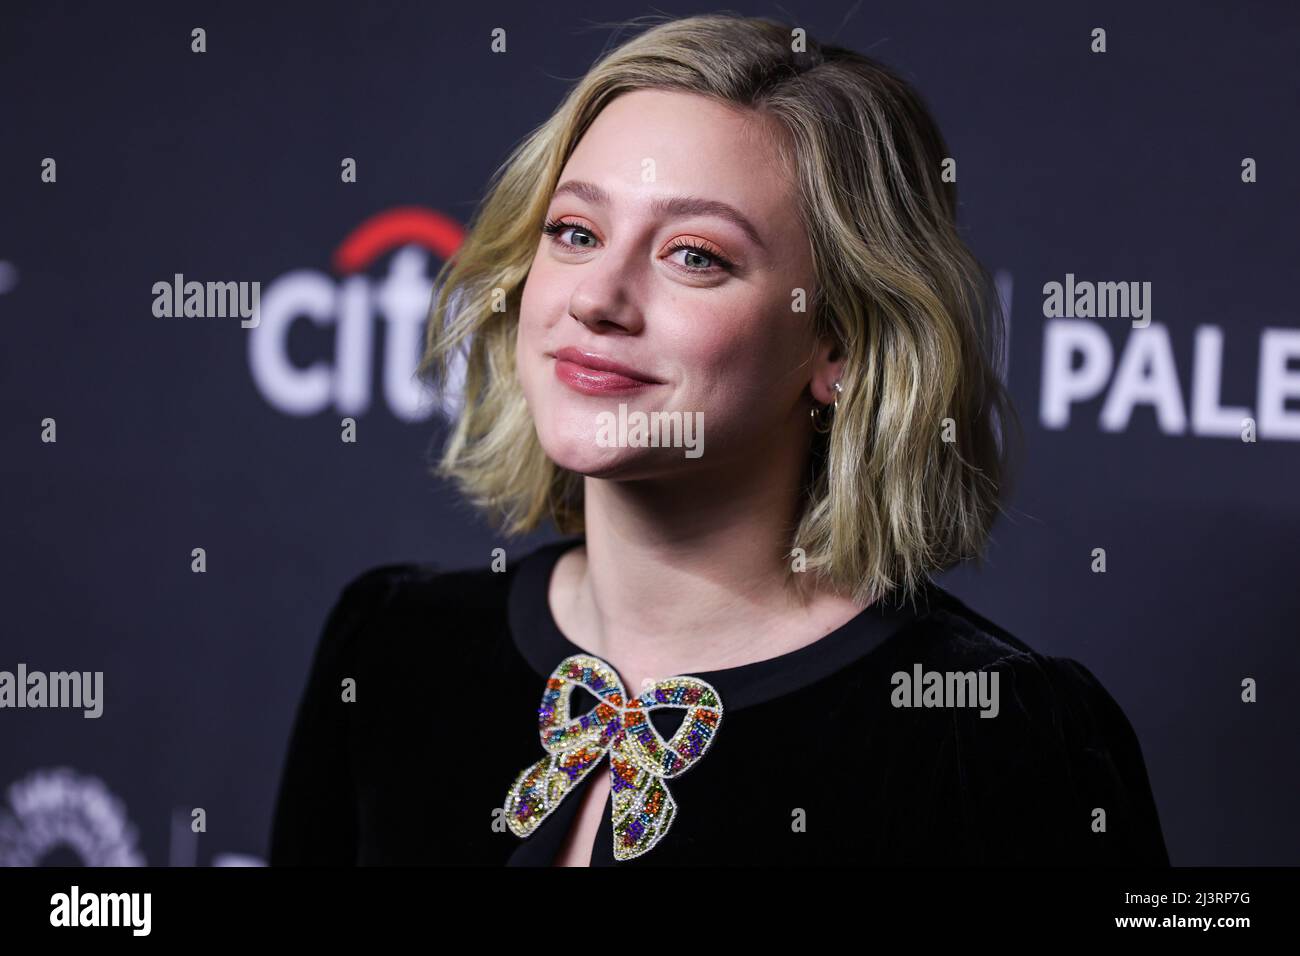 HOLLYWOOD, LOS ANGELES, CALIFORNIA, USA - APRIL 09: American actress Lili Reinhart arrives at the 2022 PaleyFest LA - The CW's 'Riverdale' held at the Dolby Theatre on April 9, 2022 in Hollywood, Los Angeles, California, United States. (Photo by Xavier Collin/Image Press Agency) Stock Photo